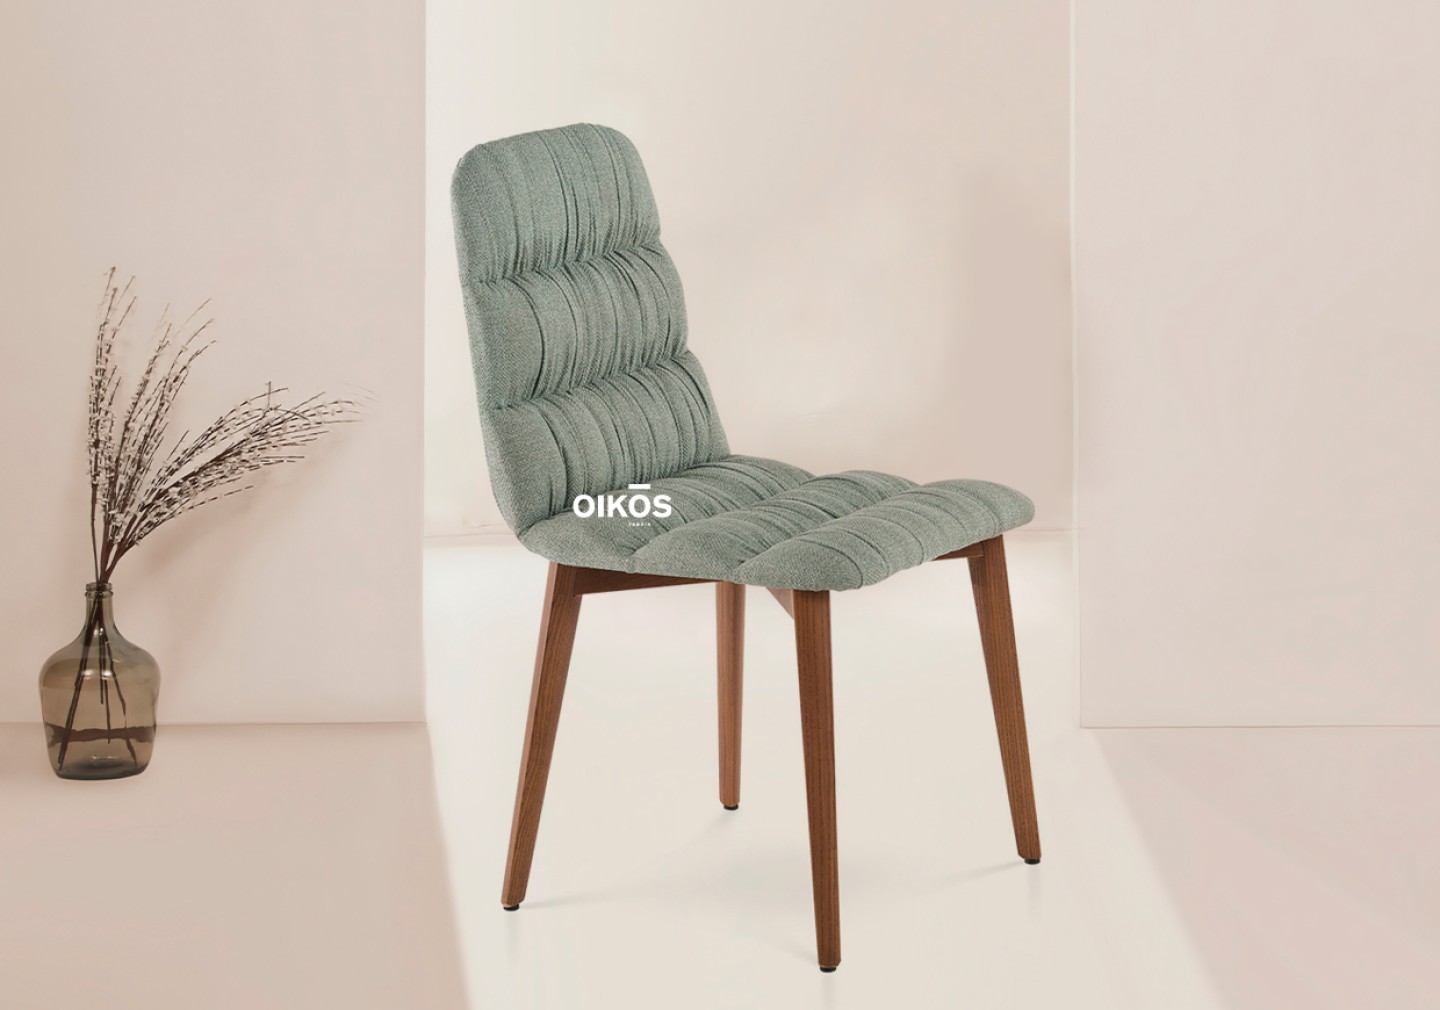 THE RUSSEL DINING CHAIR